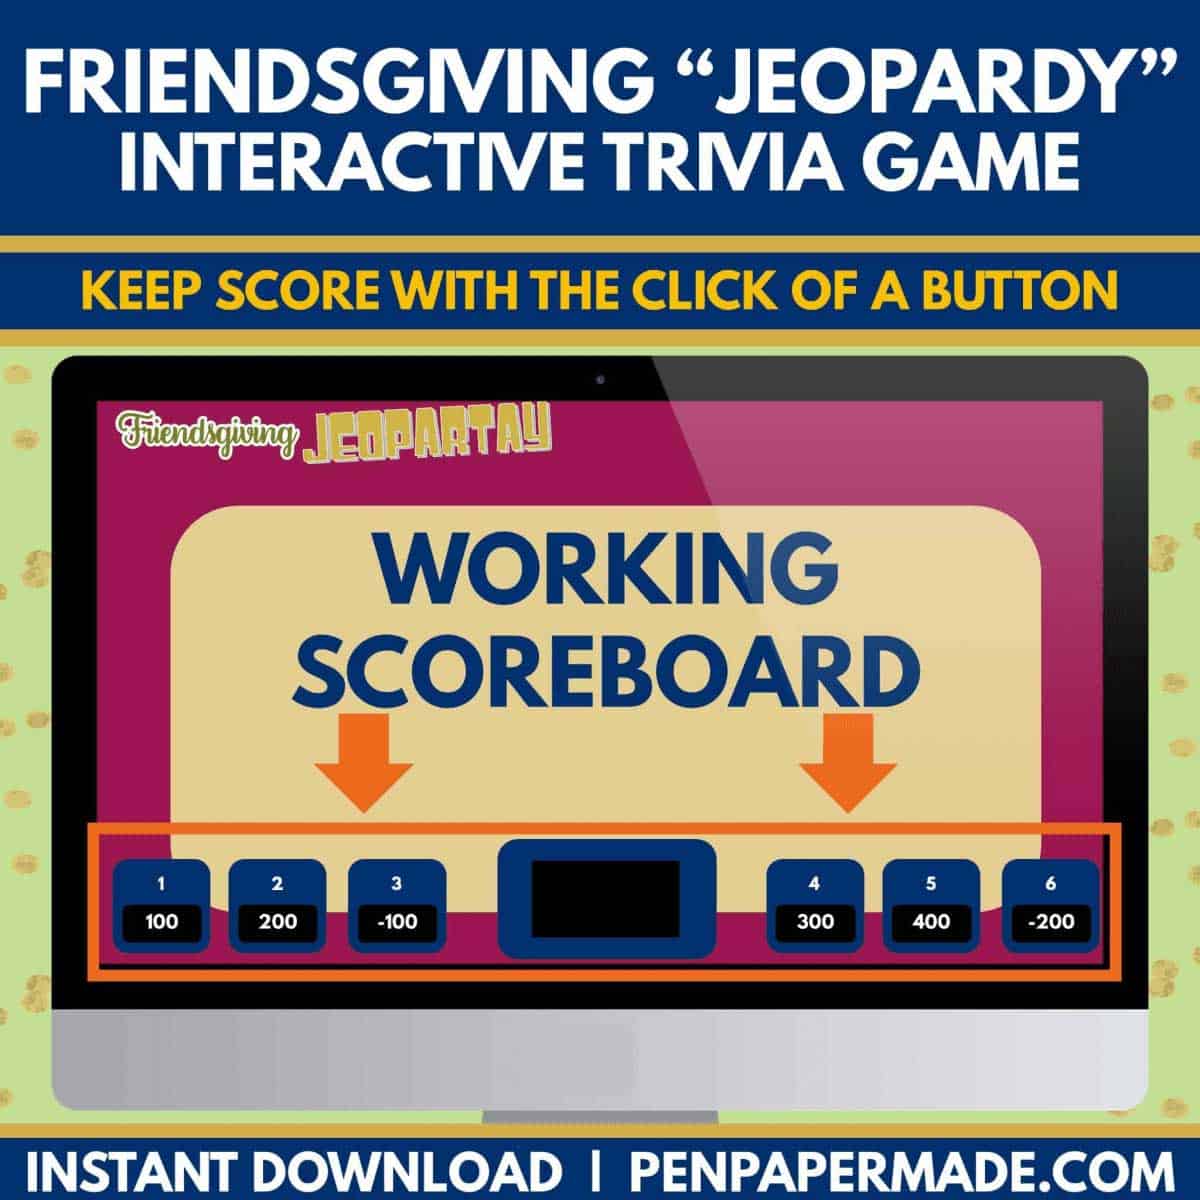 friendsgiving jeopardy macro powerpoint includes working scoreboard to track points for up to 6 teams.